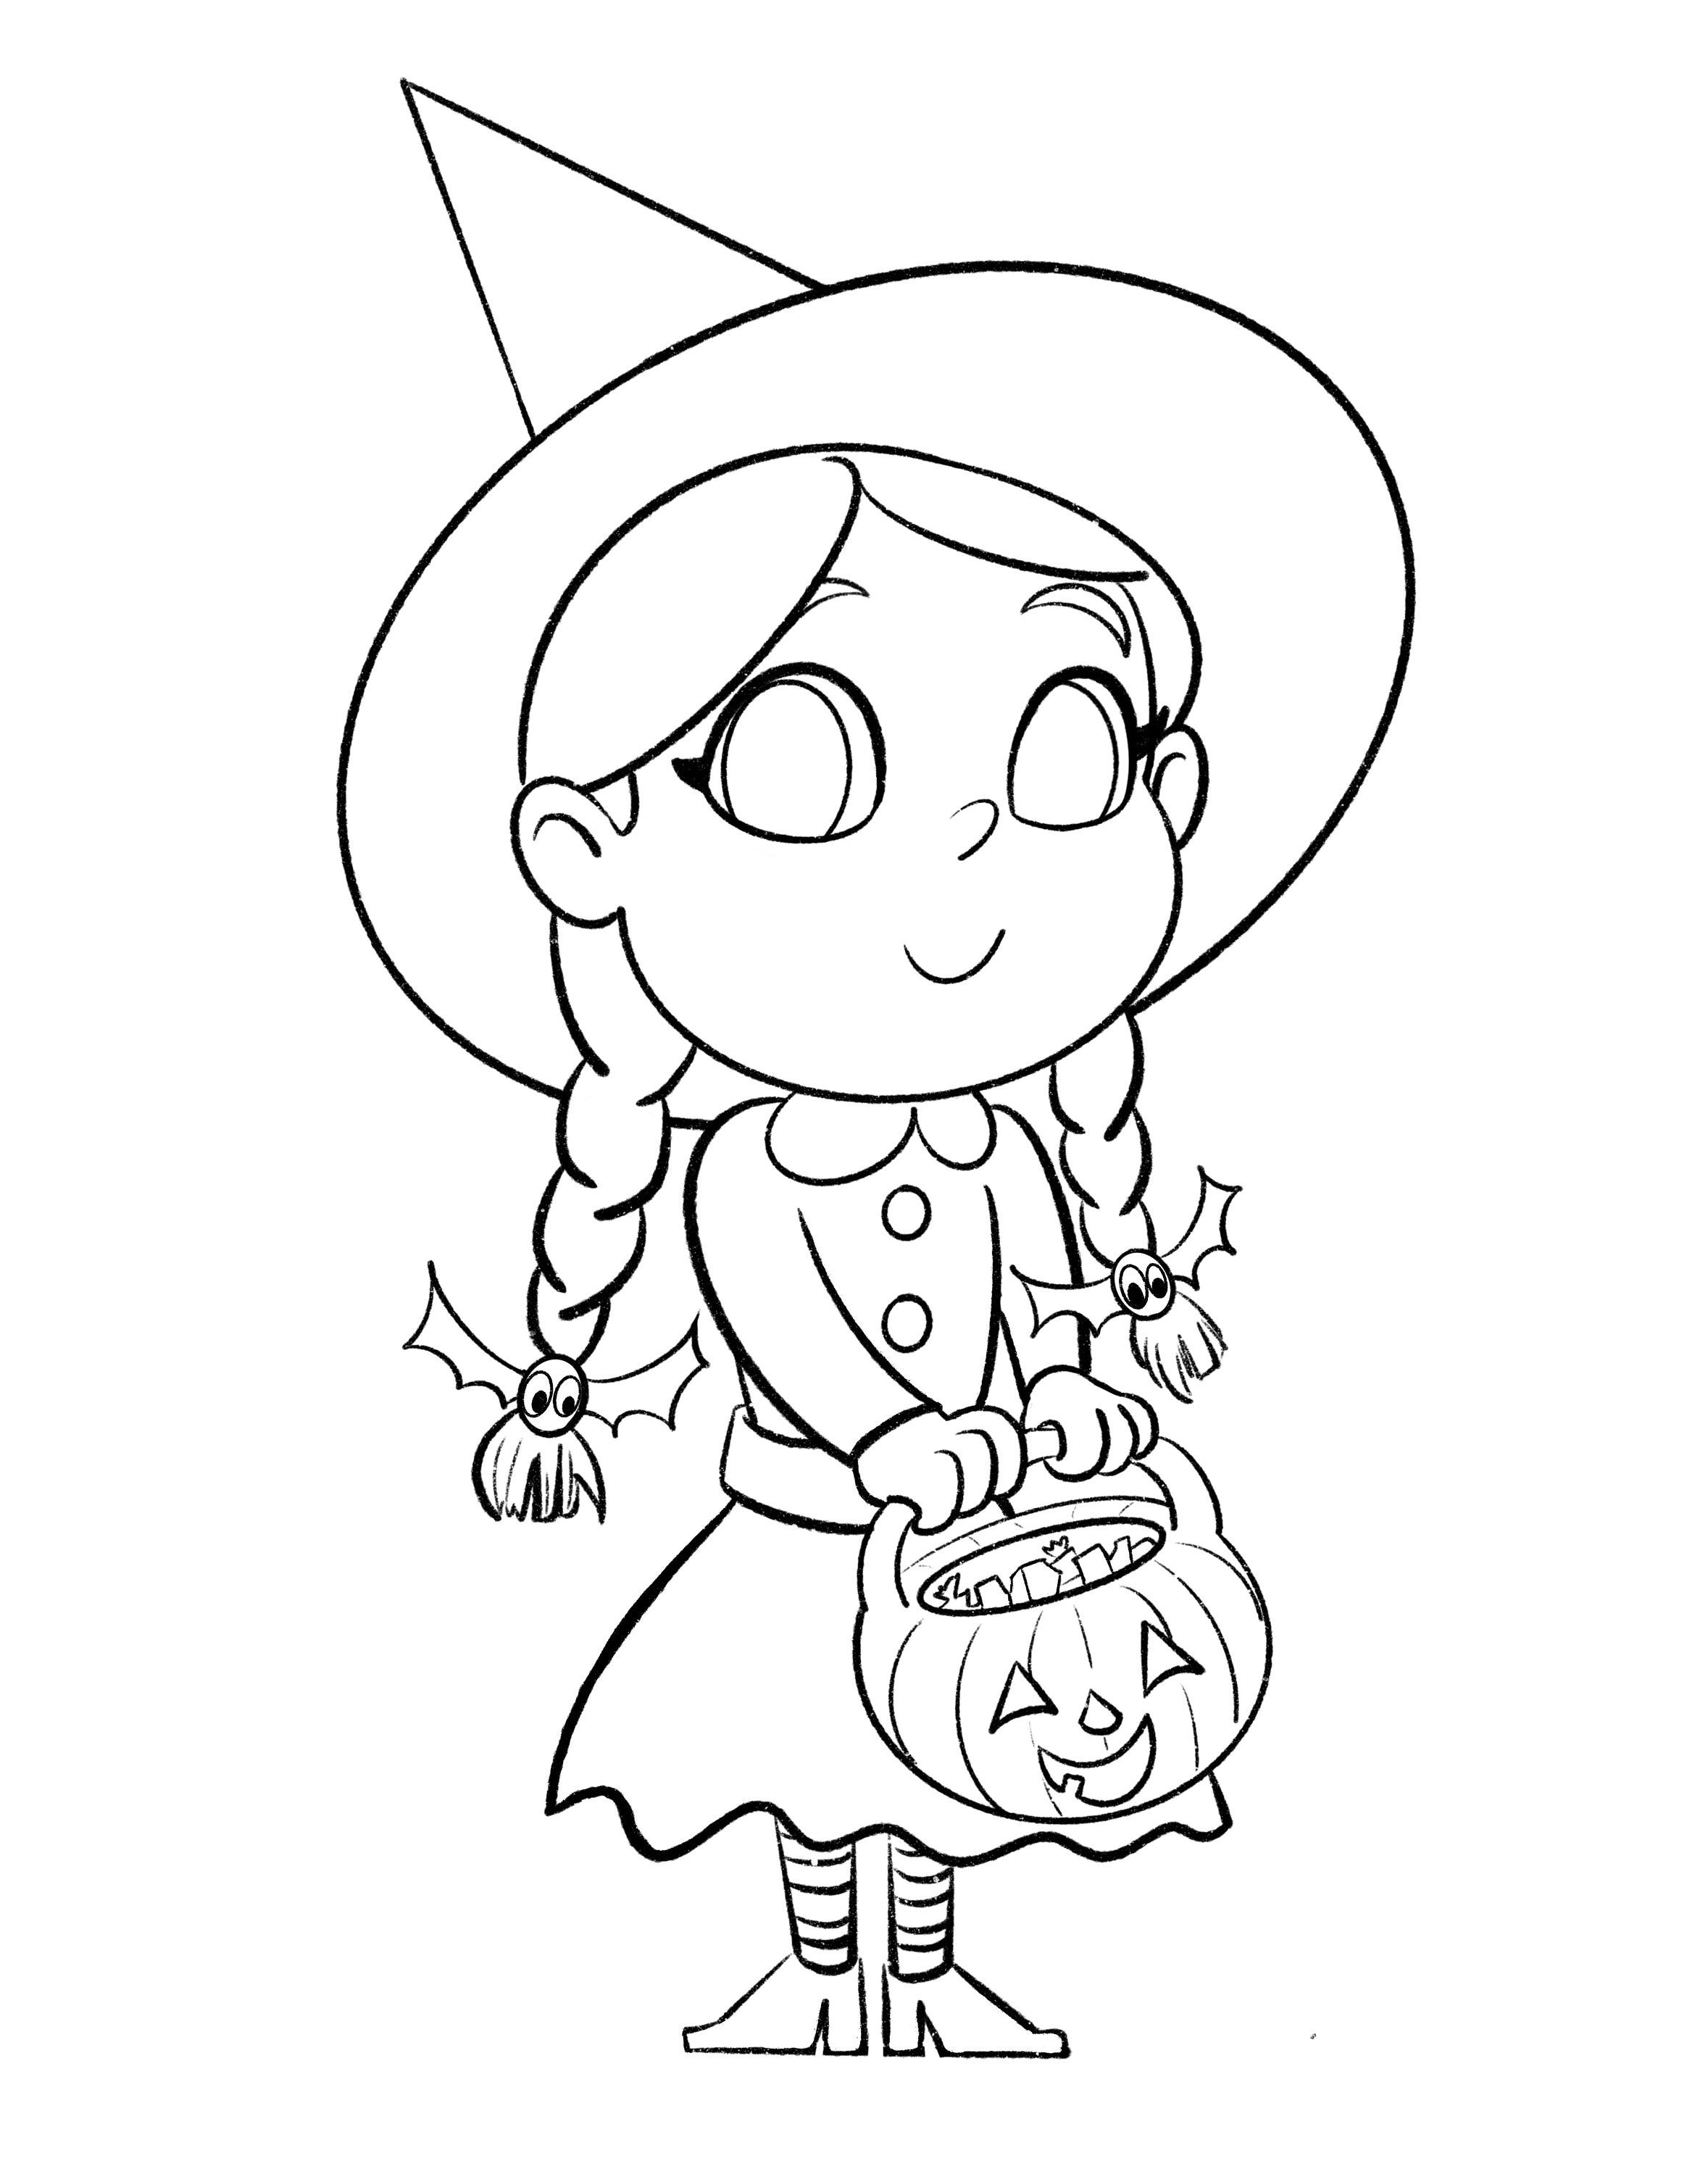 Kids halloween coloring page of cute witch download now